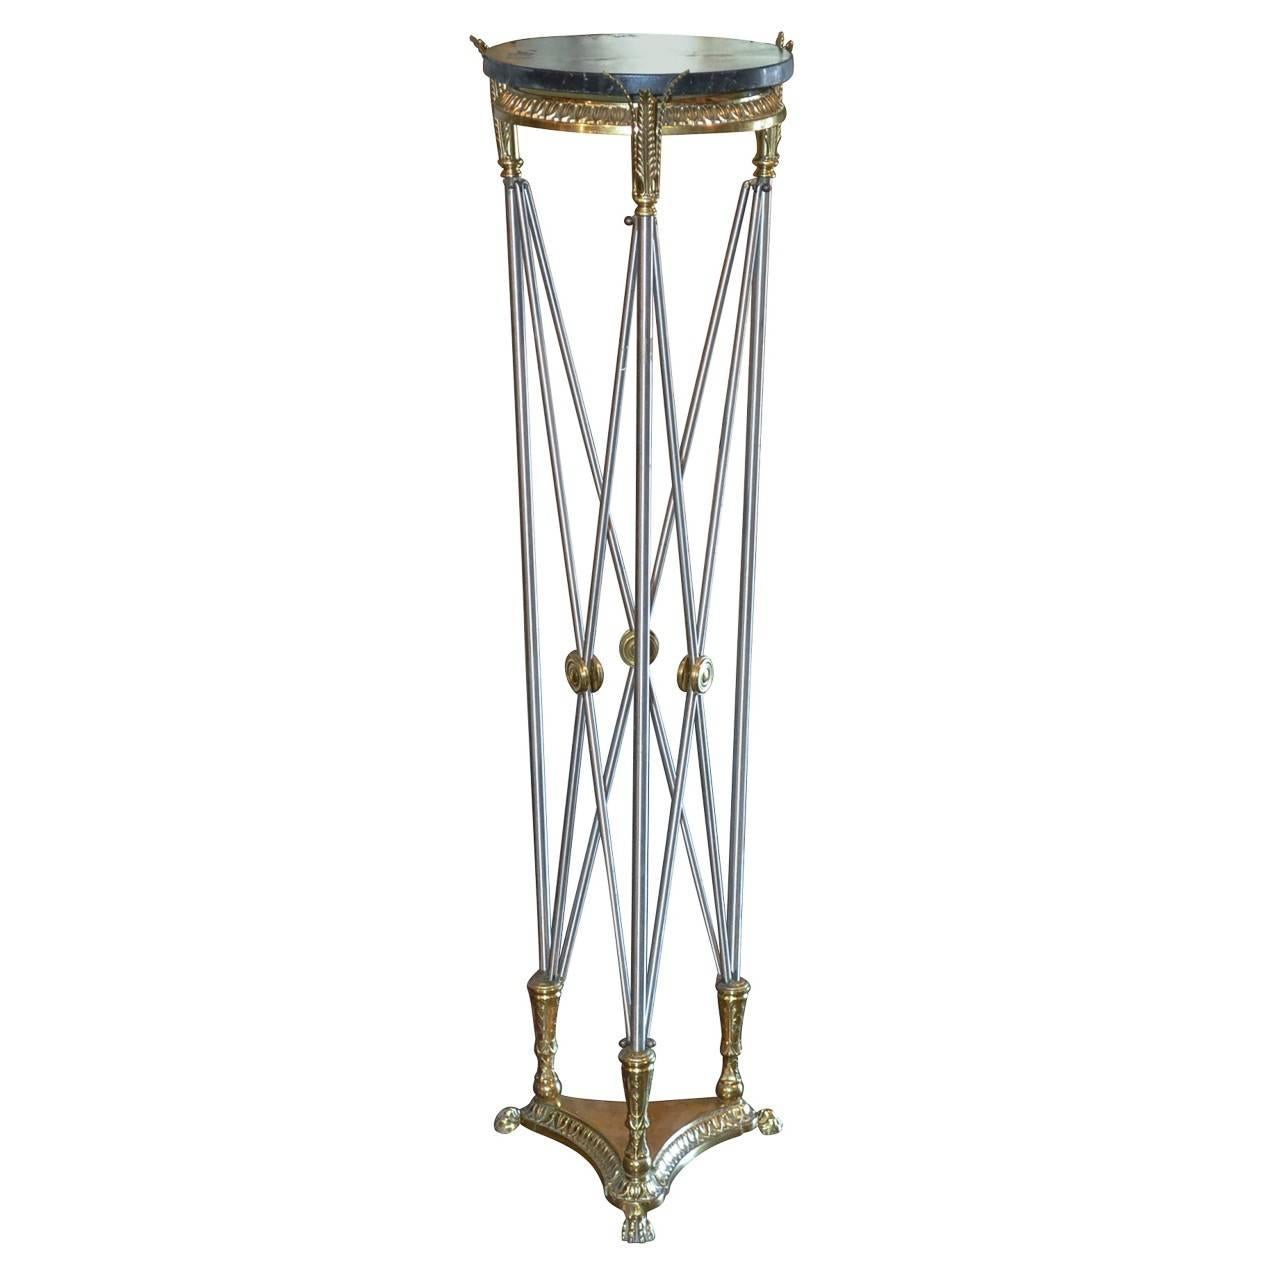 Midcentury French Directoire Style Steel and Brass Pedestal